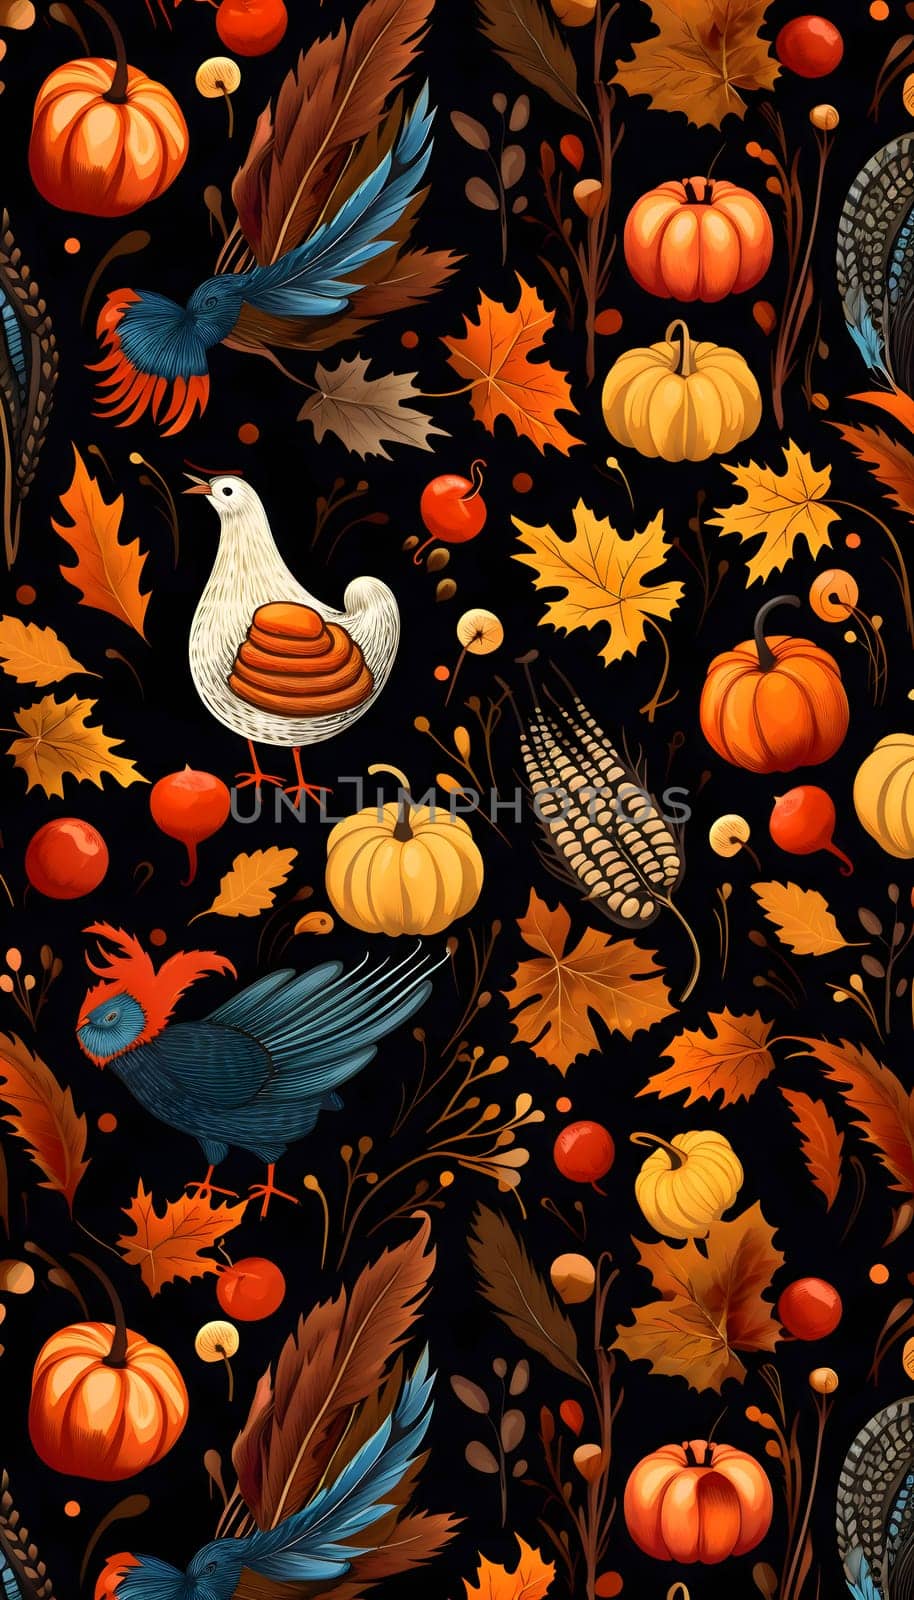 Maple leaf, turkeys, chickens, pumpkins, cobs, banner with space for your own content. Black background. by ThemesS